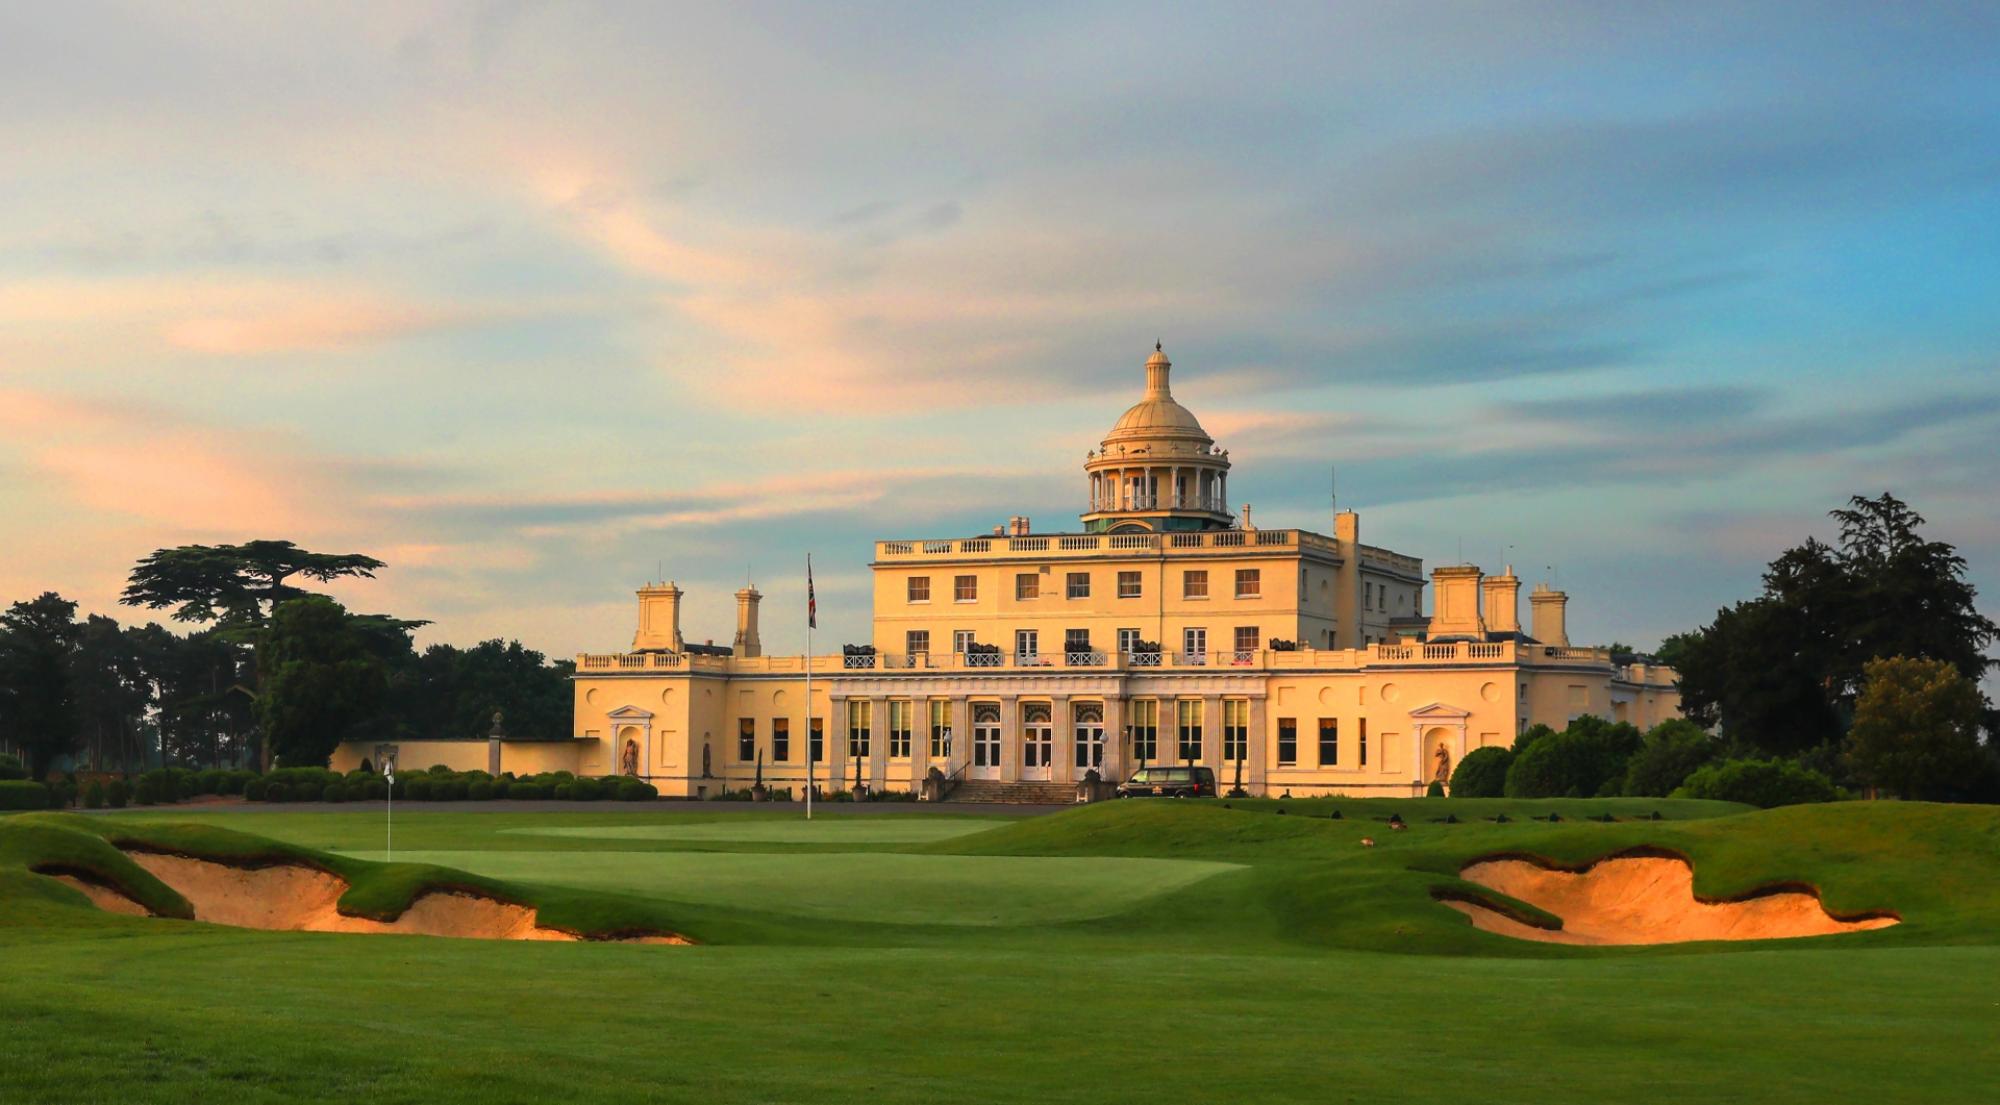 Stoke Park Hotel & Country Club, book the best golf trip in Buckinghamshire